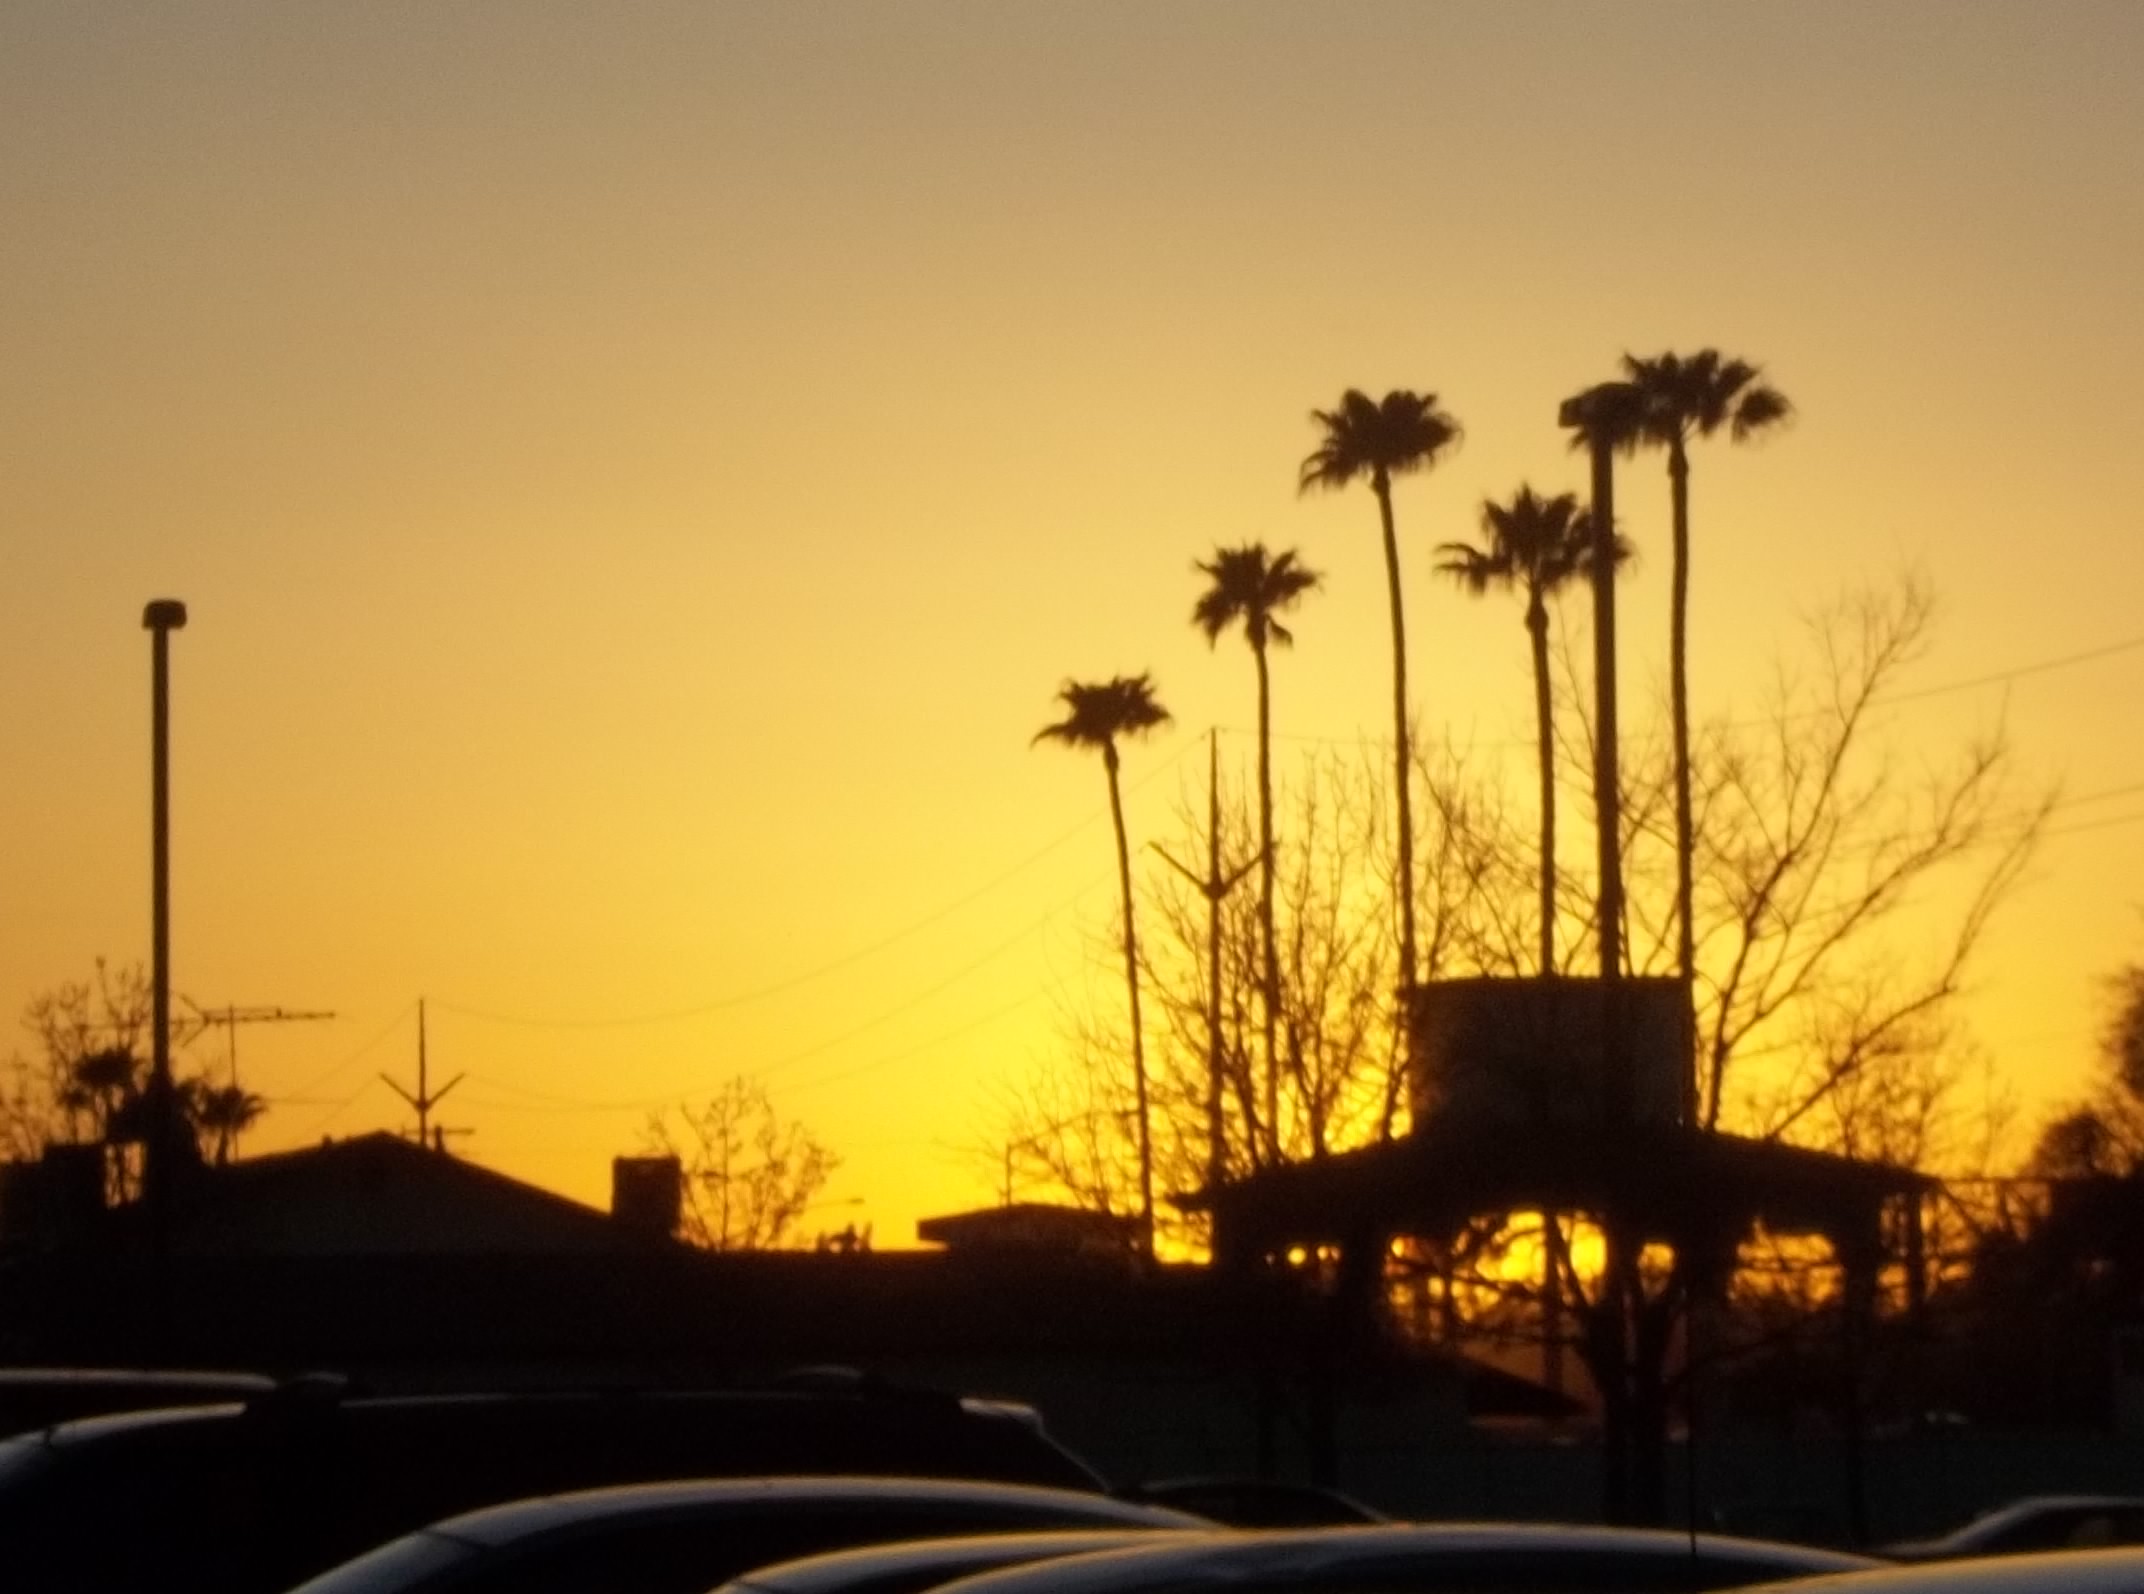 palm trees at sunset are lined up against a parking lot